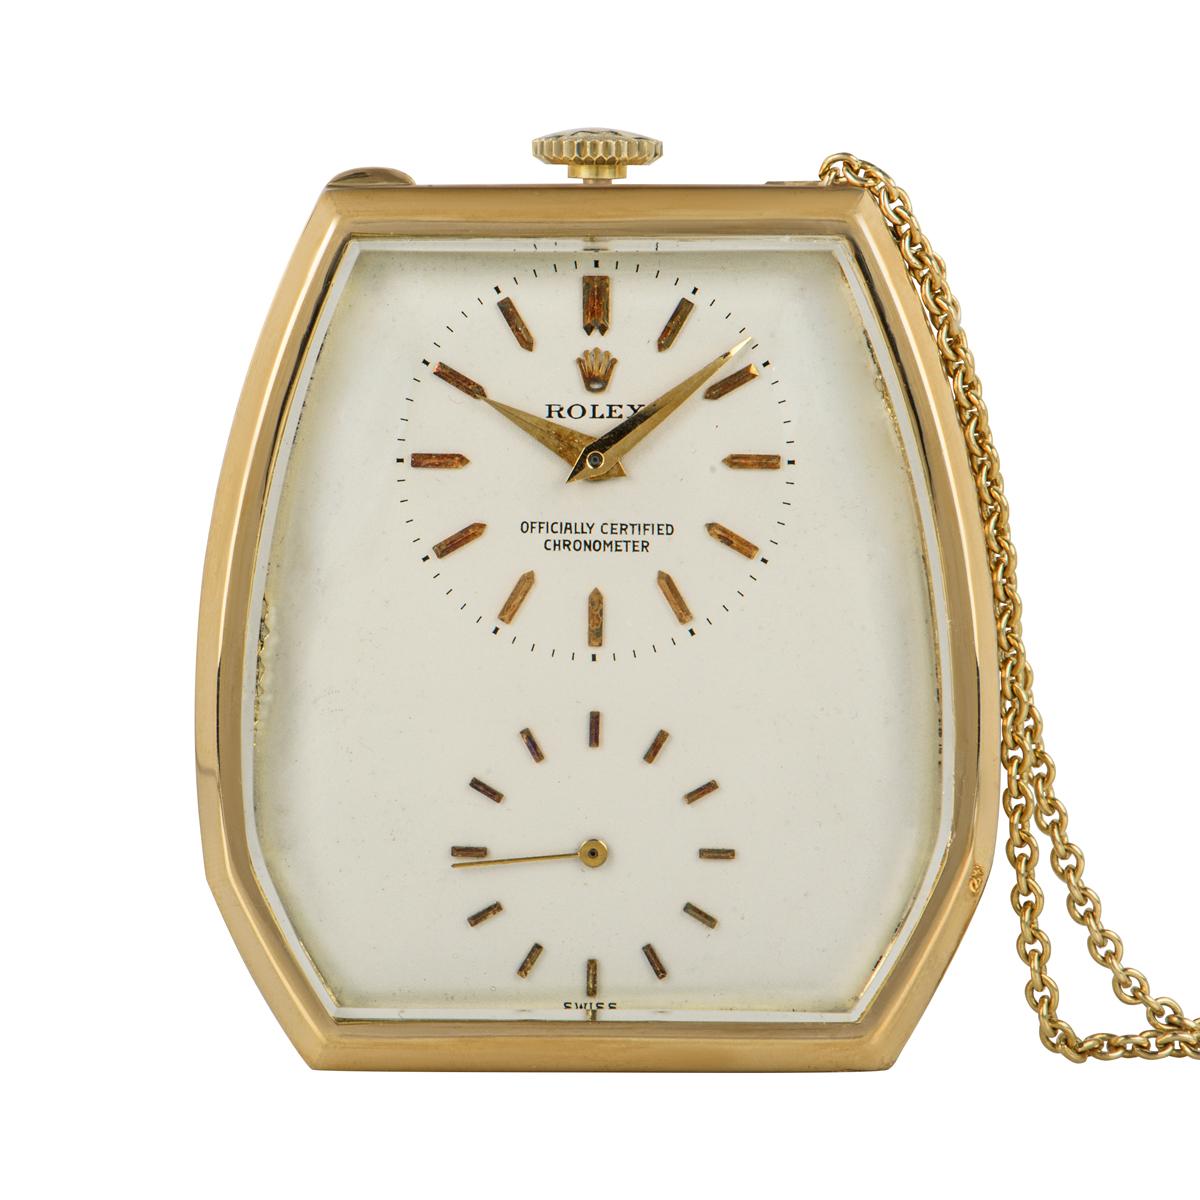 Rolex Prince. A very rare 38mm 18ct yellow gold dress pocket watch with a specially made chain by Rolex, C1920.

Dial: The excellent cream dial with batons and crown signed Rolex Officially Certified Chronometer with original dagger hands and large